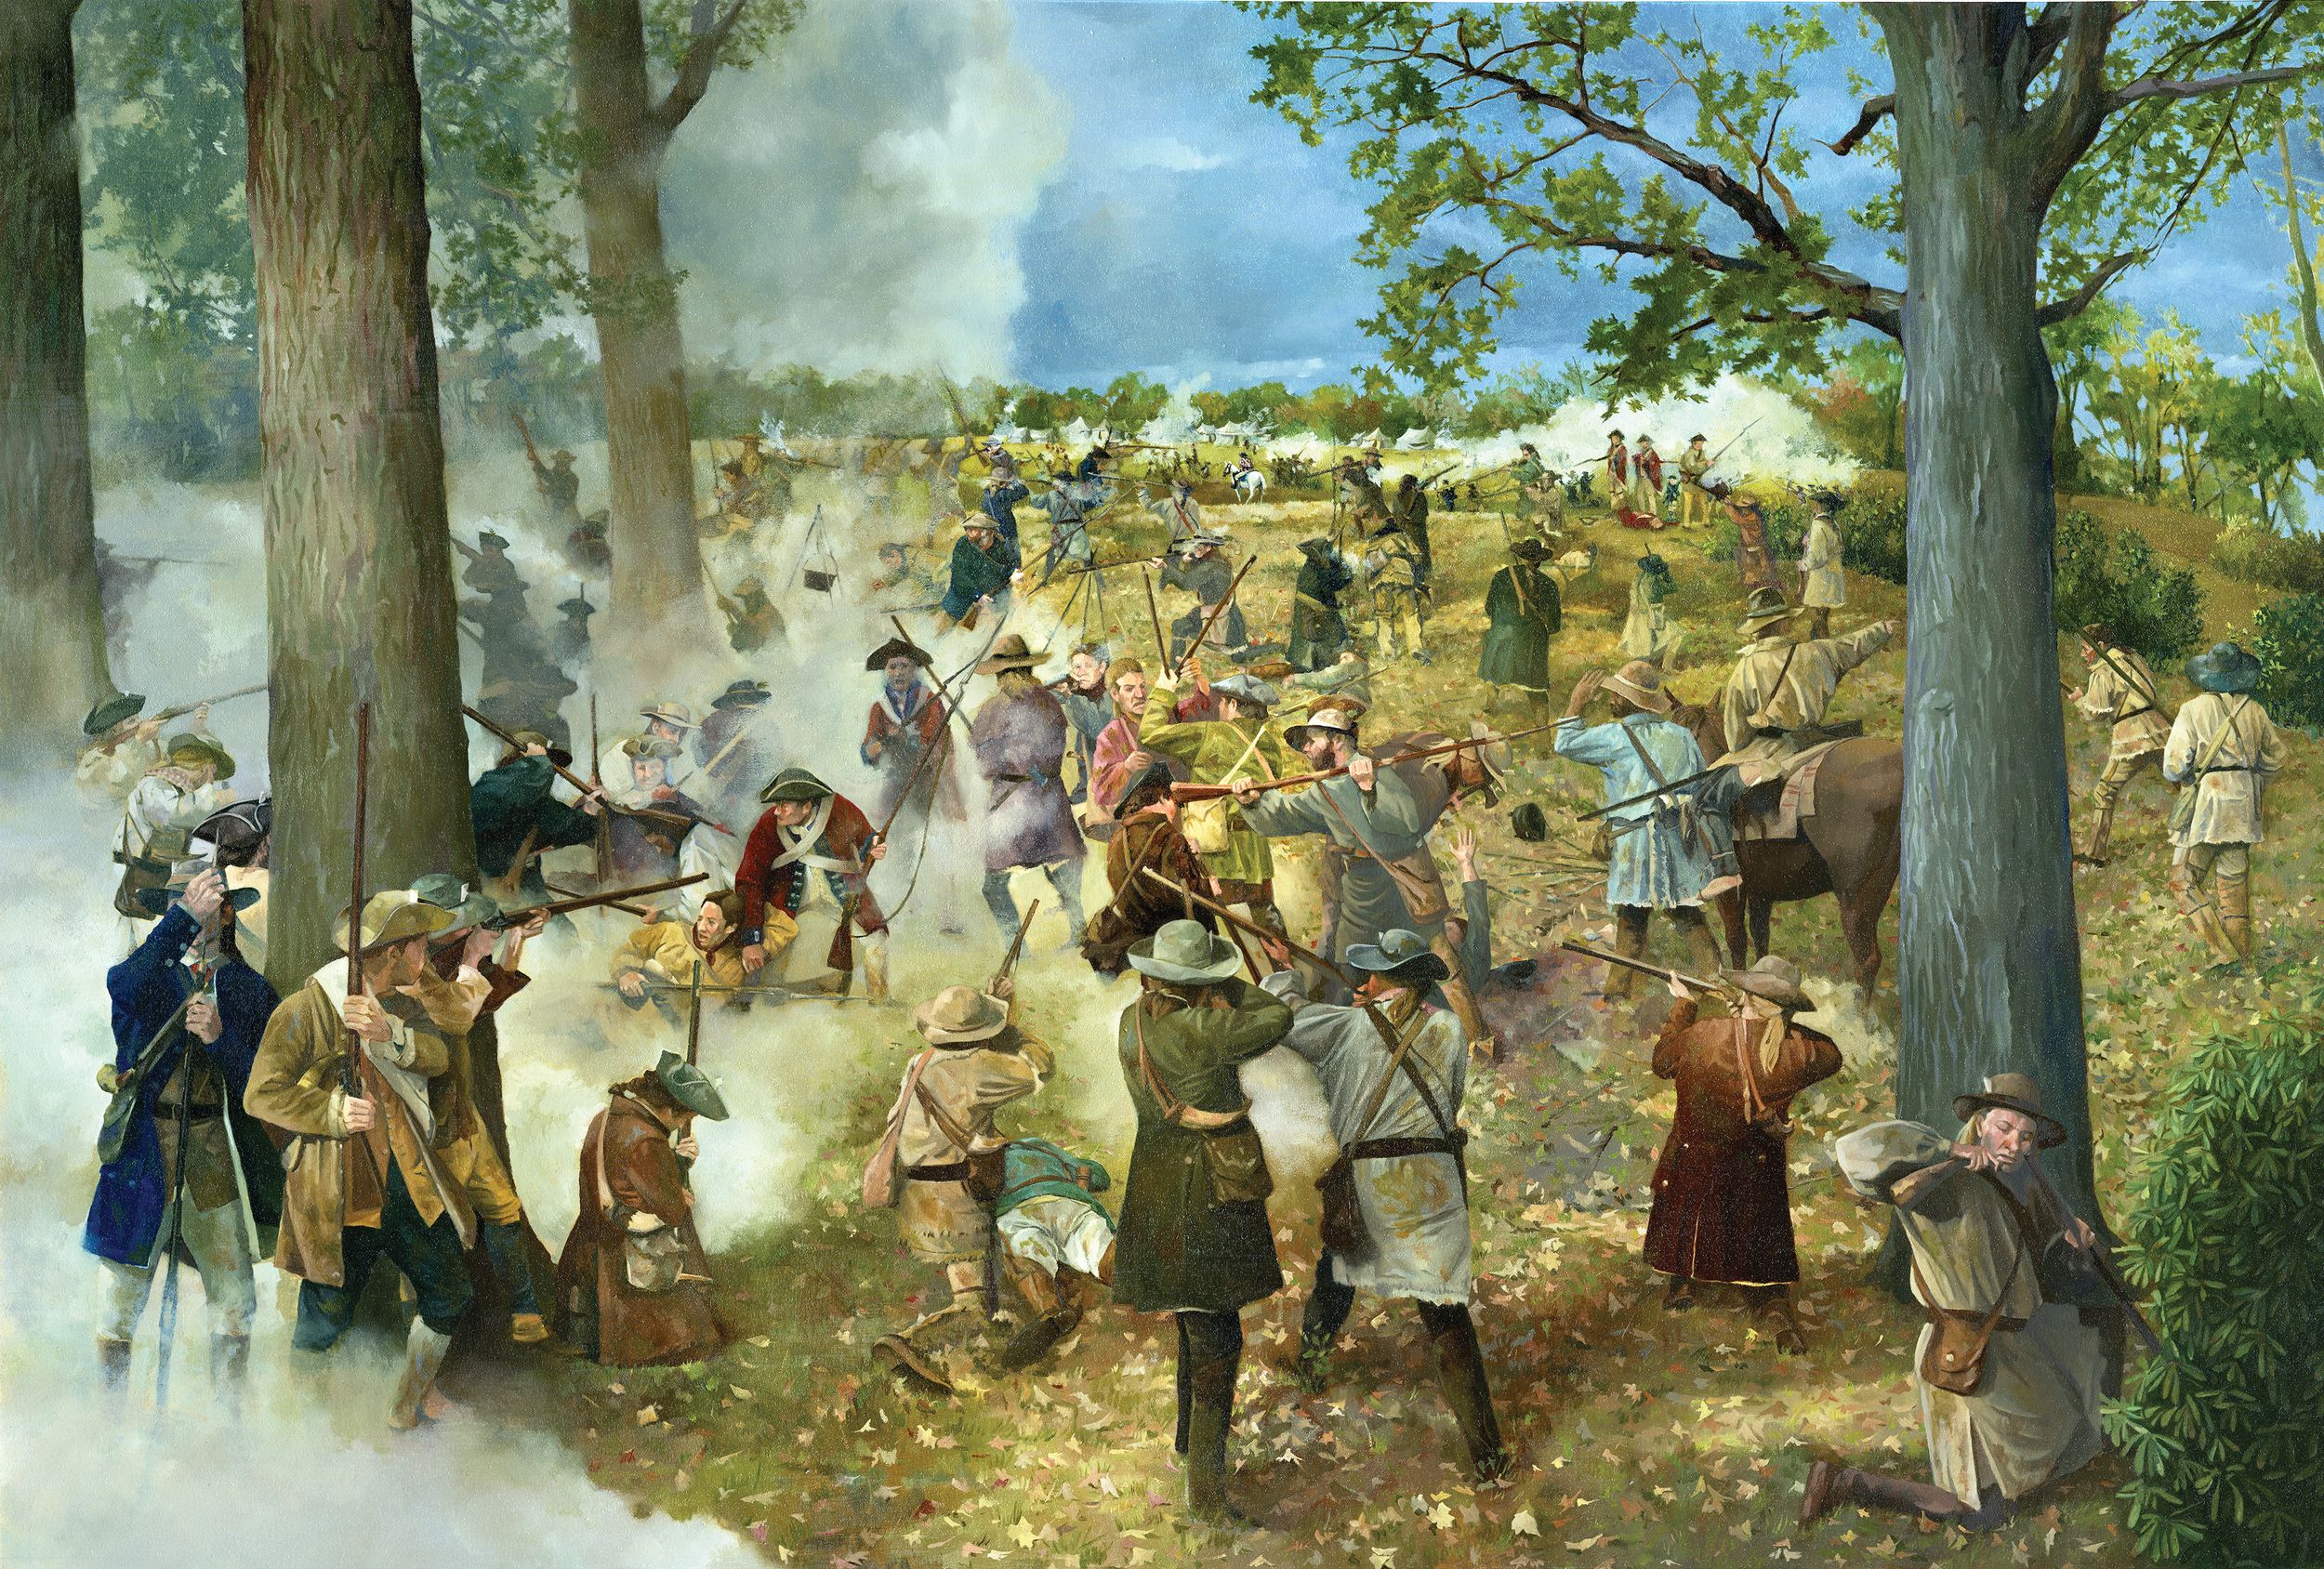 American Patriot militia gain the crest of Kings Mountain where Loyalist troops, including the King’s American Regiment wearing red coats, had circled their supply wagons for a defensive stand. The Loyalists, armed with muskets and bayonets, drove off several Patriot advances by charging with their bayonets, a weapon the Patriots lacked. Many of the Overmountain Men and Back Country militia carried rifles, which proved superior on the rocky, wooded slope.